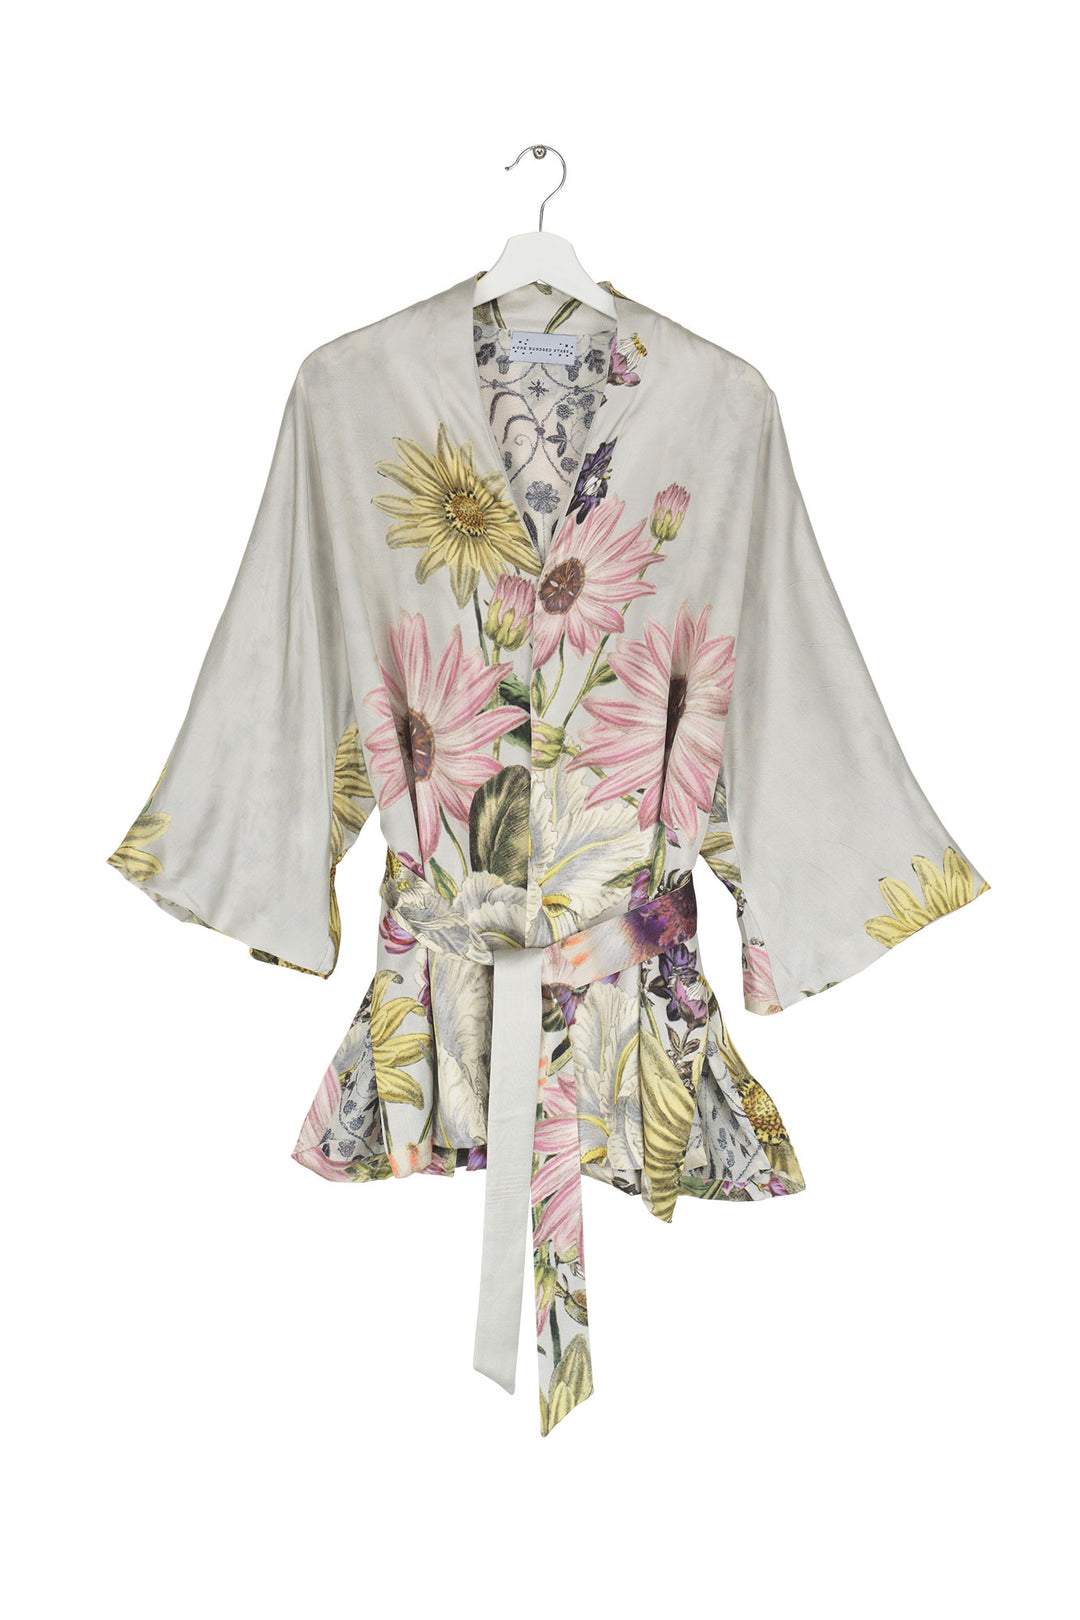 Women's satin wrap jacket in stone with daisy floral print by One Hundred Stars